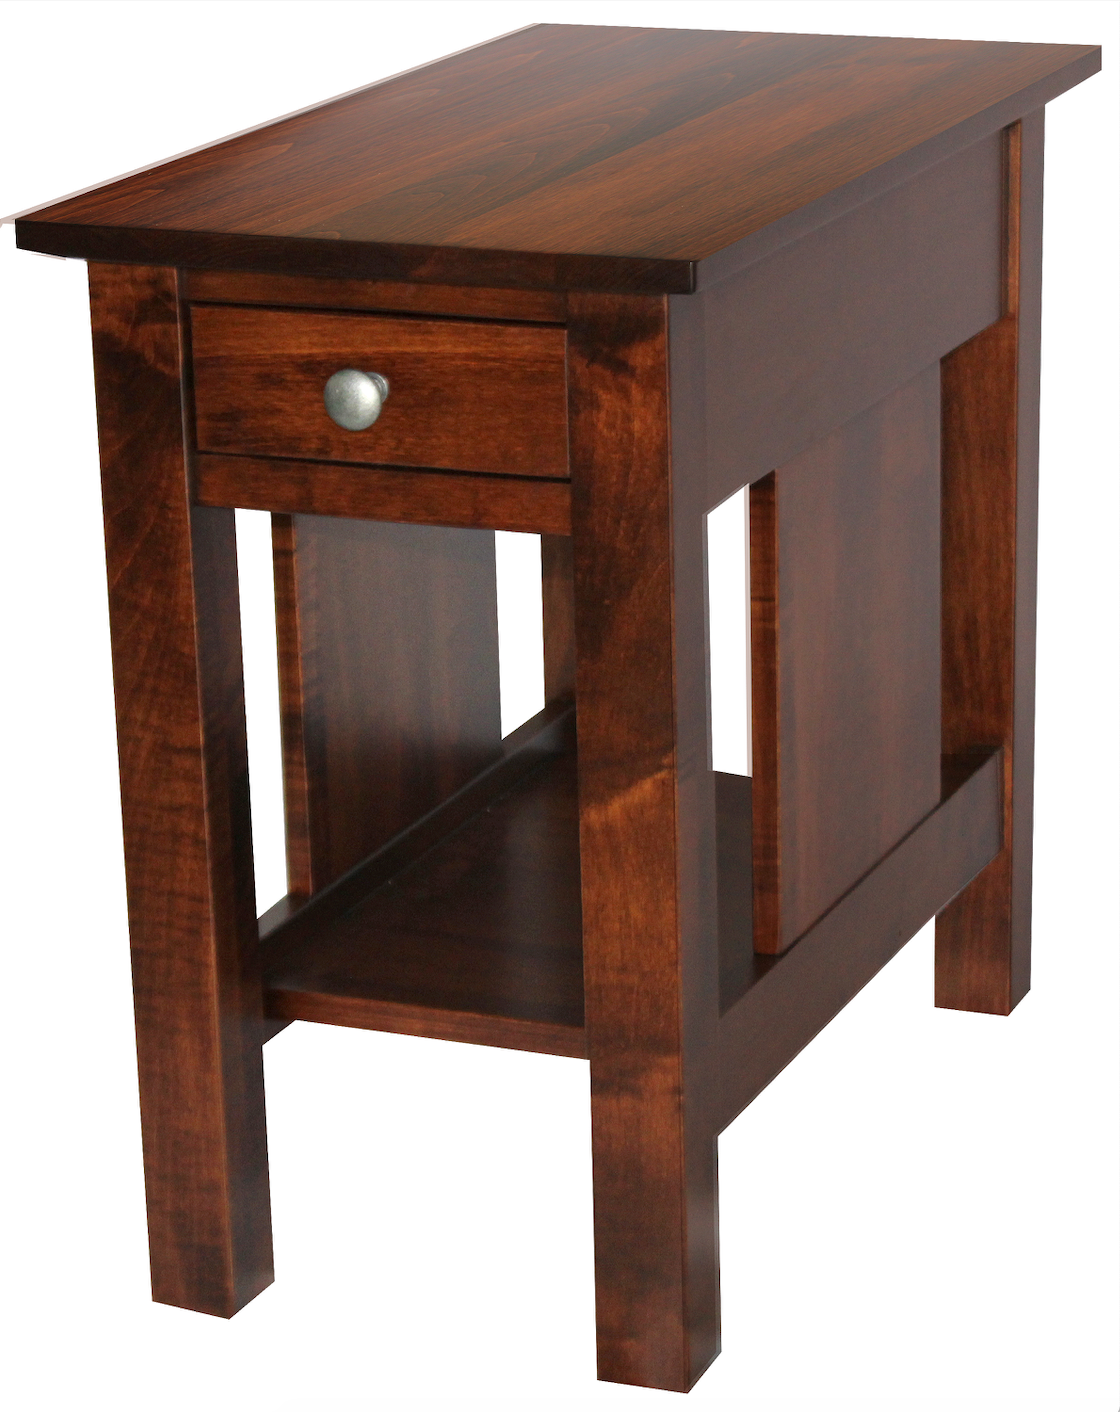 Weldon 14" x 26" End Table With Drawer